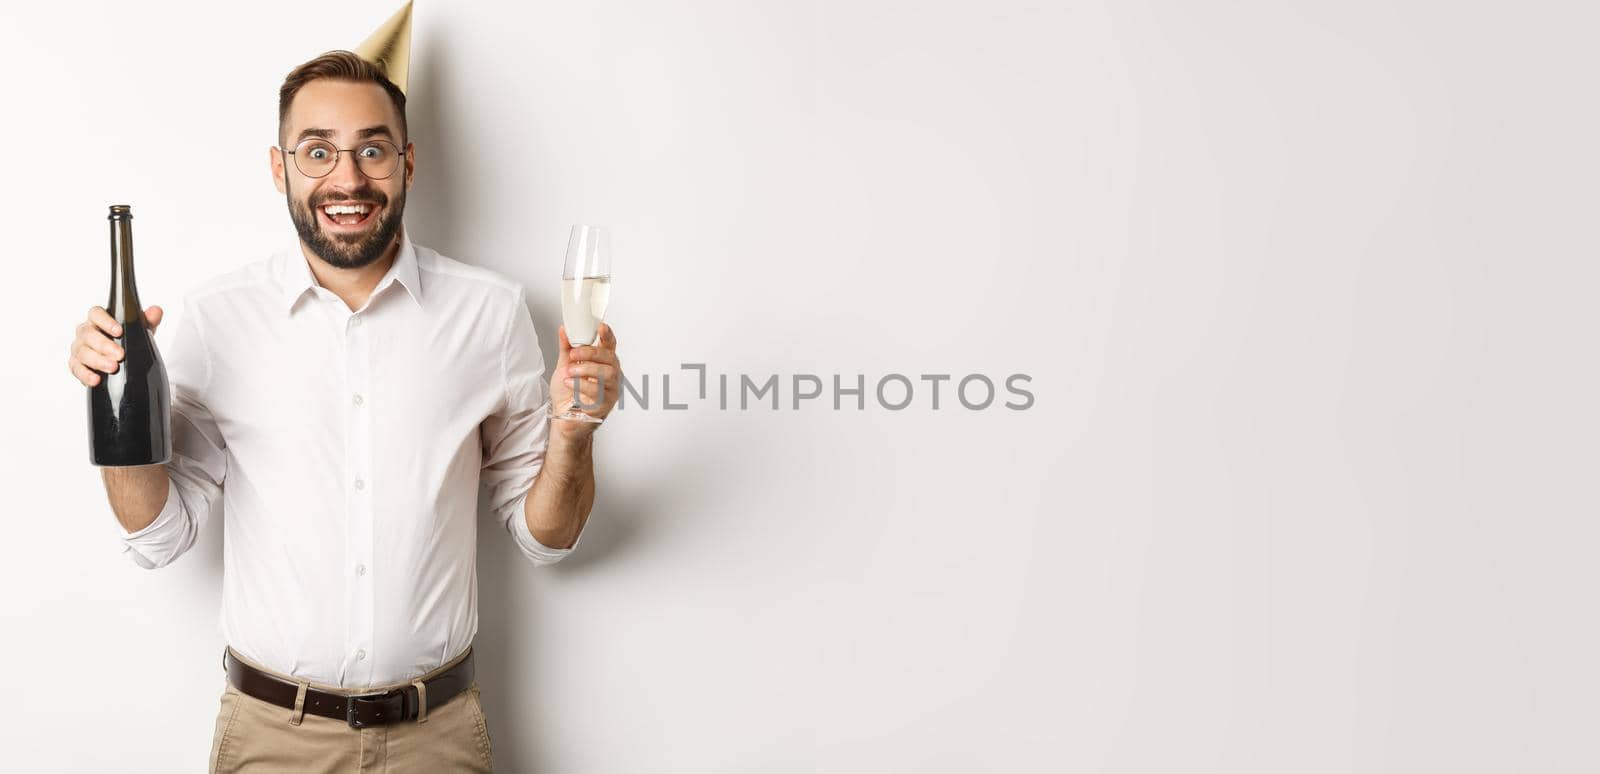 Celebration and holidays. Excited man enjoying birthday party, wearing b-day hat and drinking champagne, standing over white background.